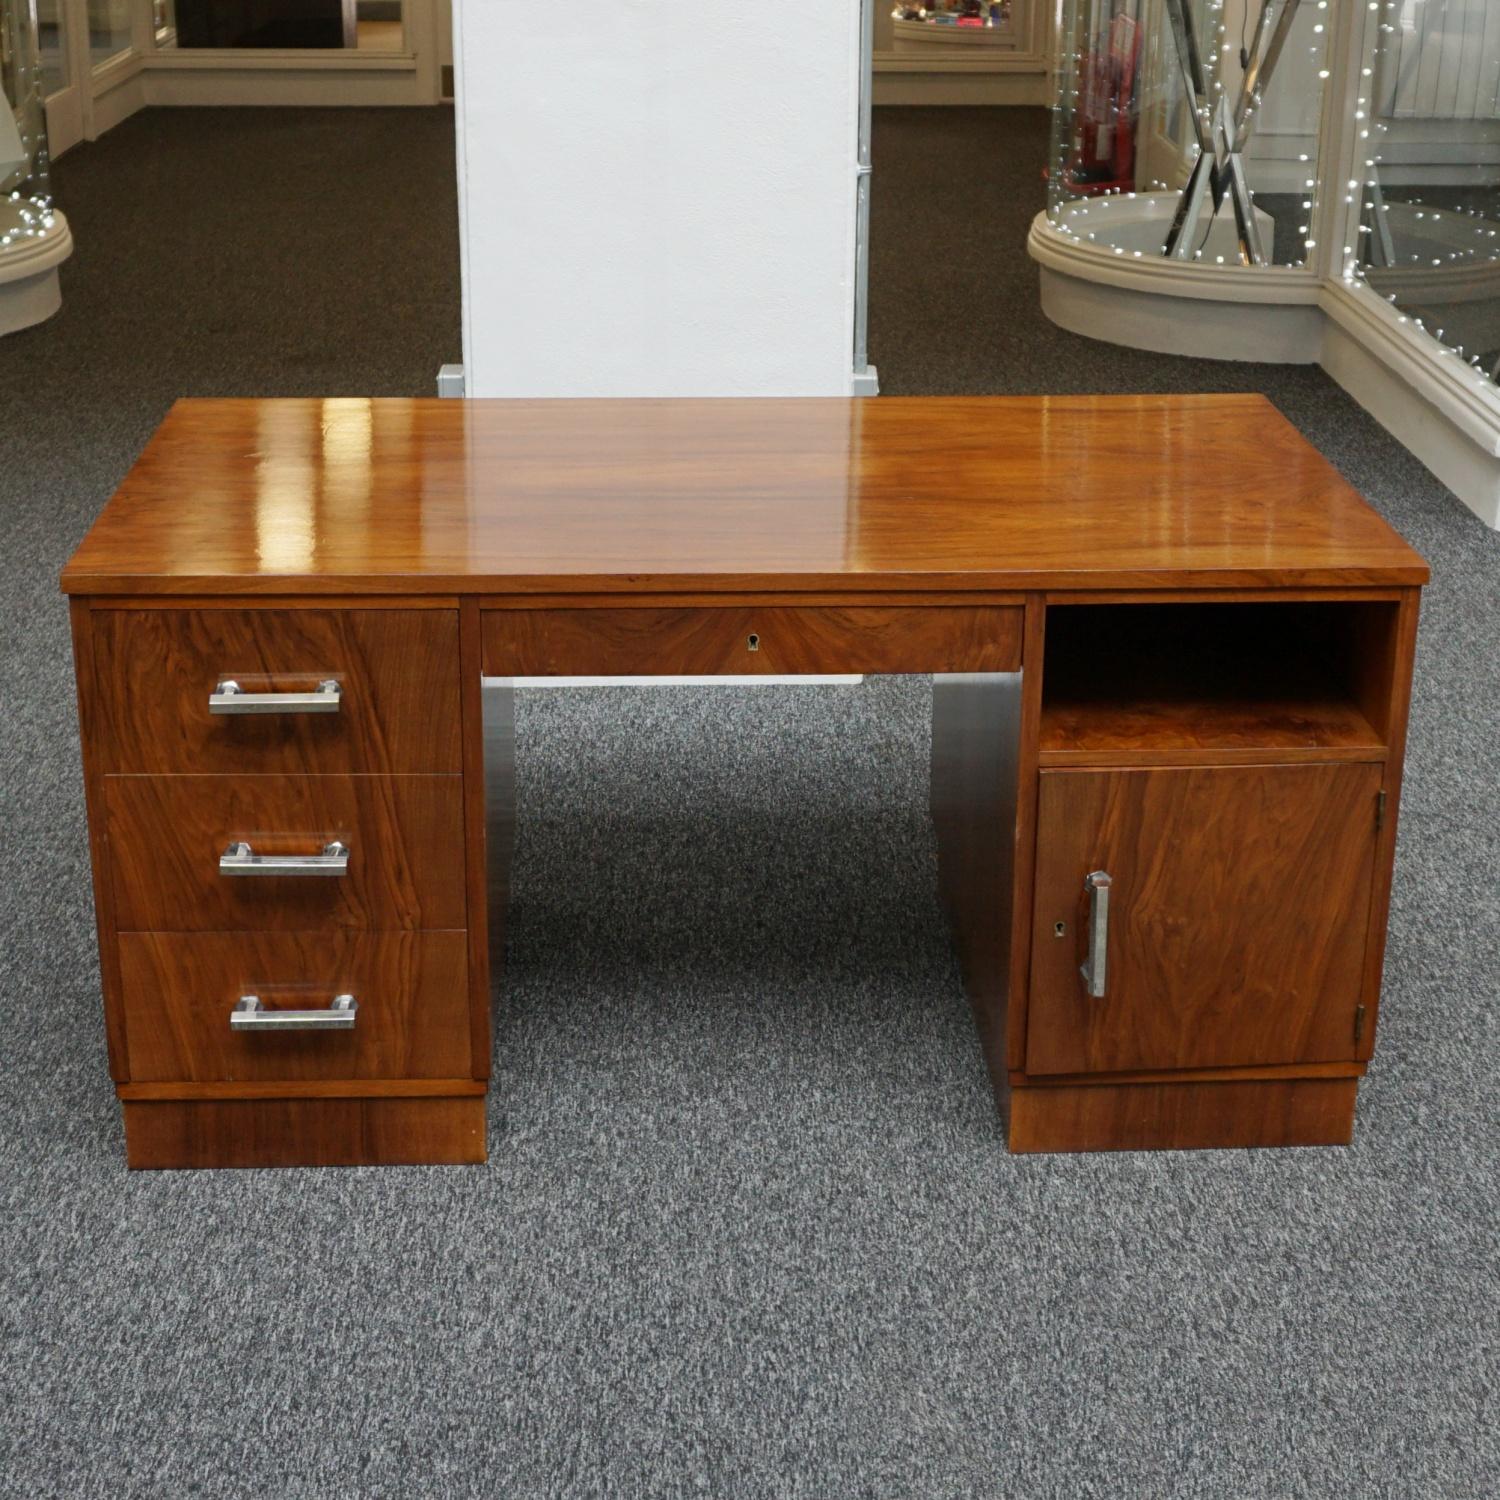 An Art Deco Desk. Burr and Figured walnut with original chrome handles. Three deep drawers to the left with a central upper drawer and left hand side open shelf with a lower cupboard opening to reveal inset shelves. Veneered to sides and back.